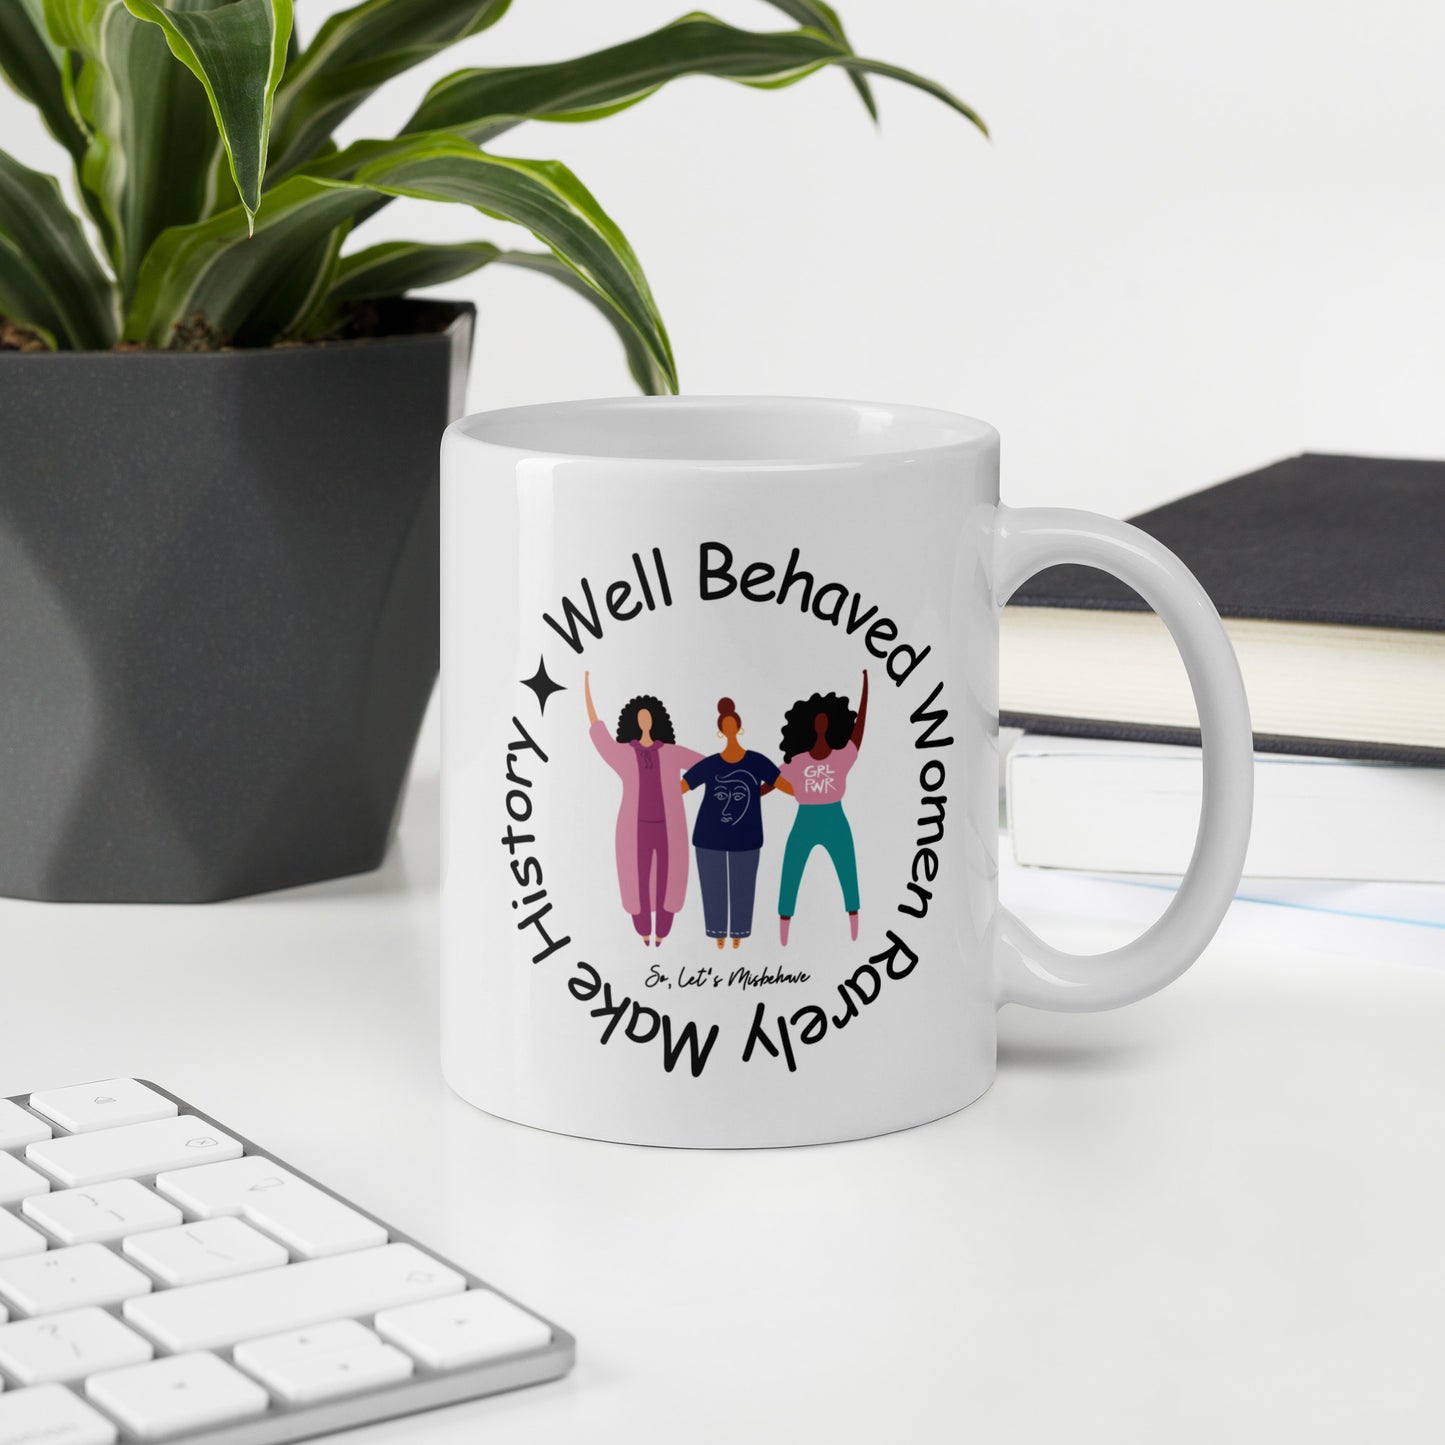 Well Behaved Women Rarely Make History, So Let's Misbehave White Ceramic Coffee Mug